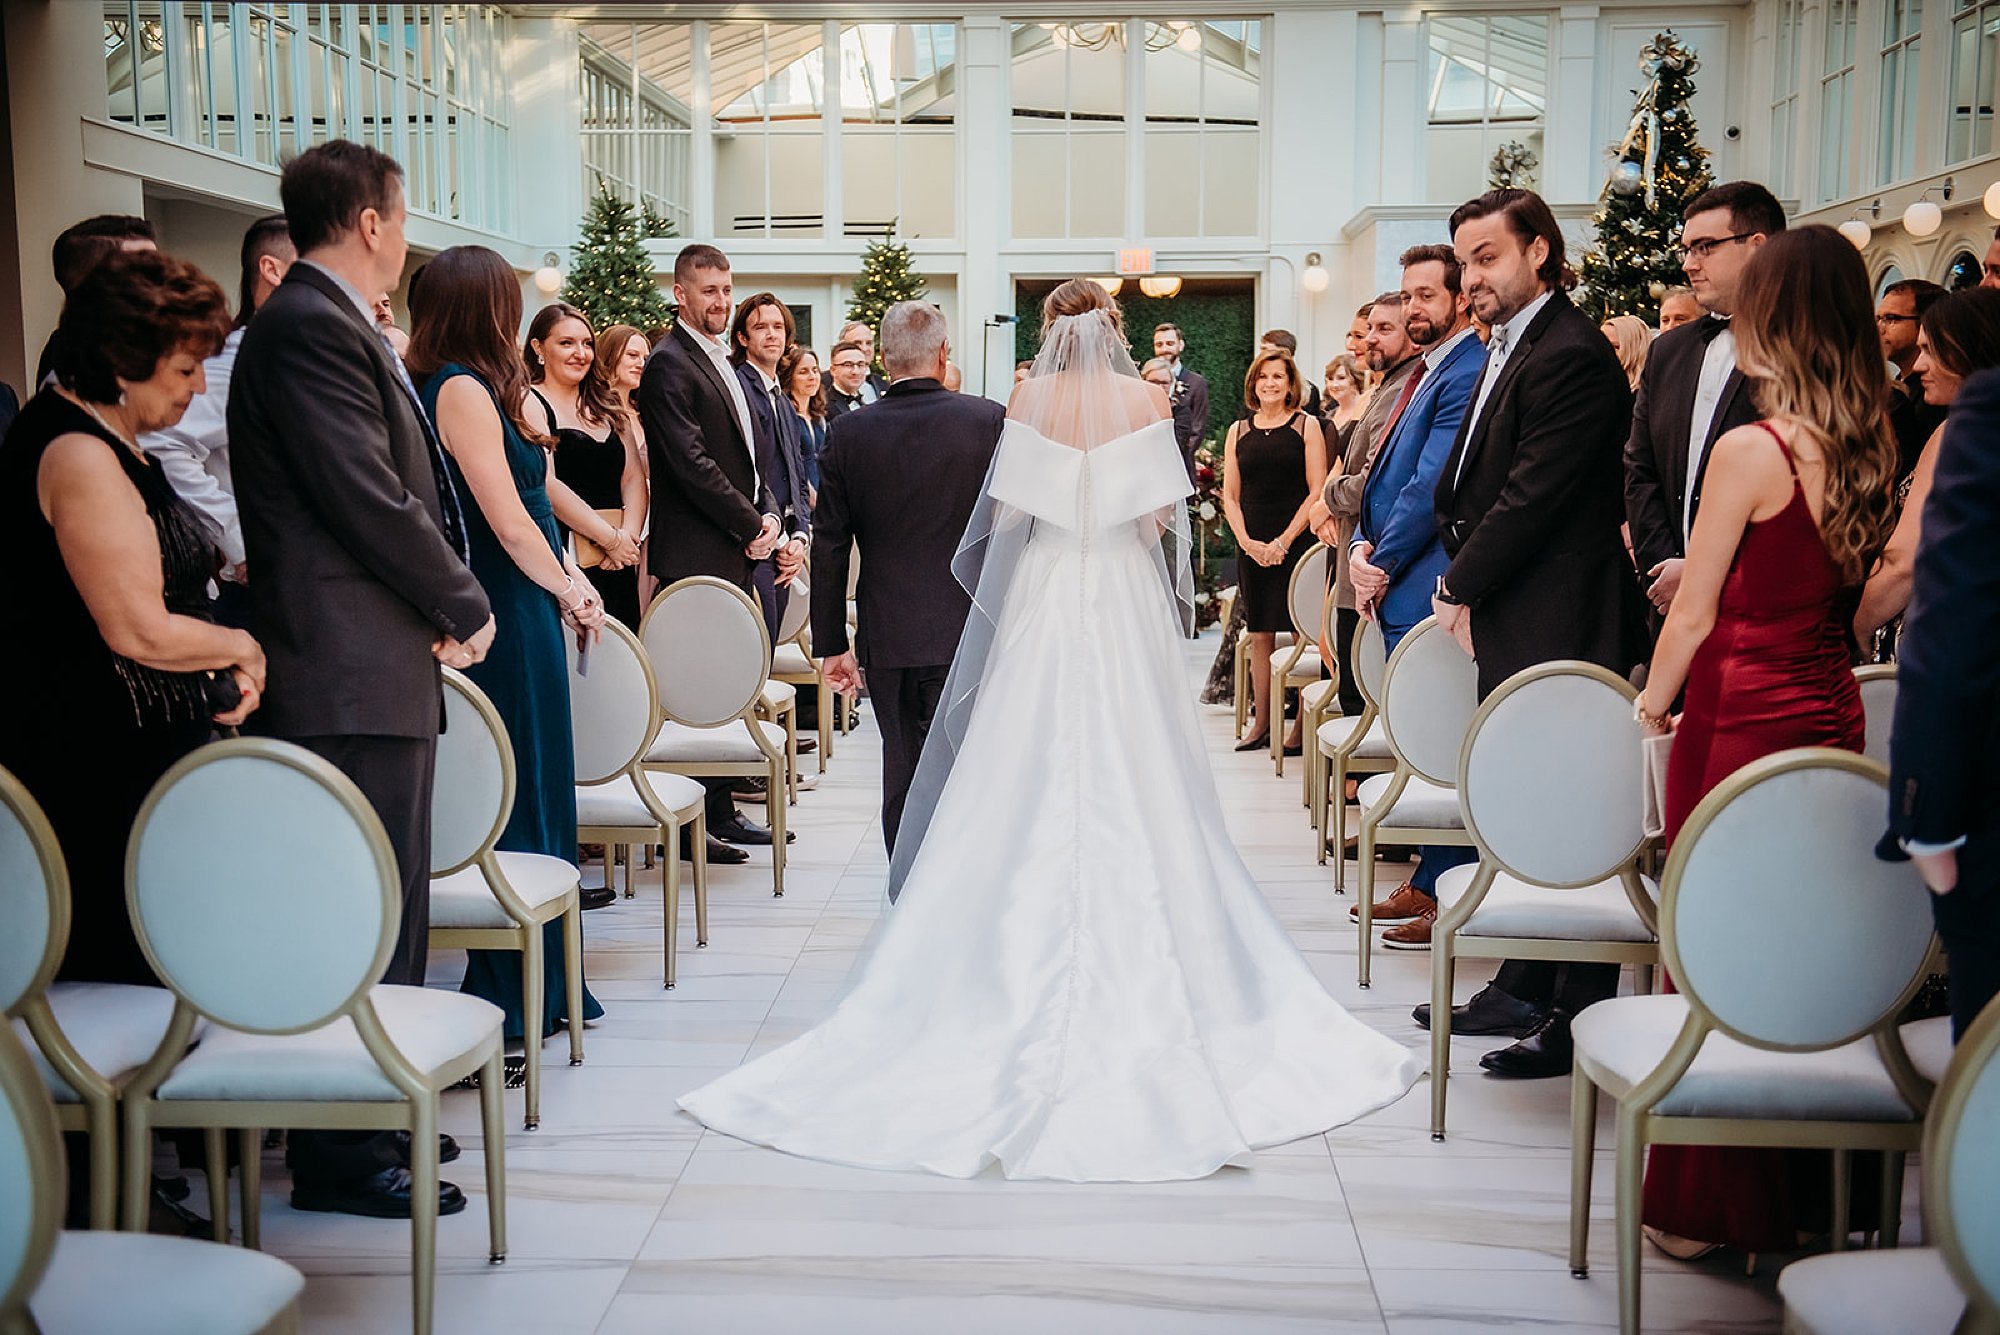 bride walks down aisle with father for wedding ceremony in atrium at The Adelphi Hotel in Saratoga Springs NY